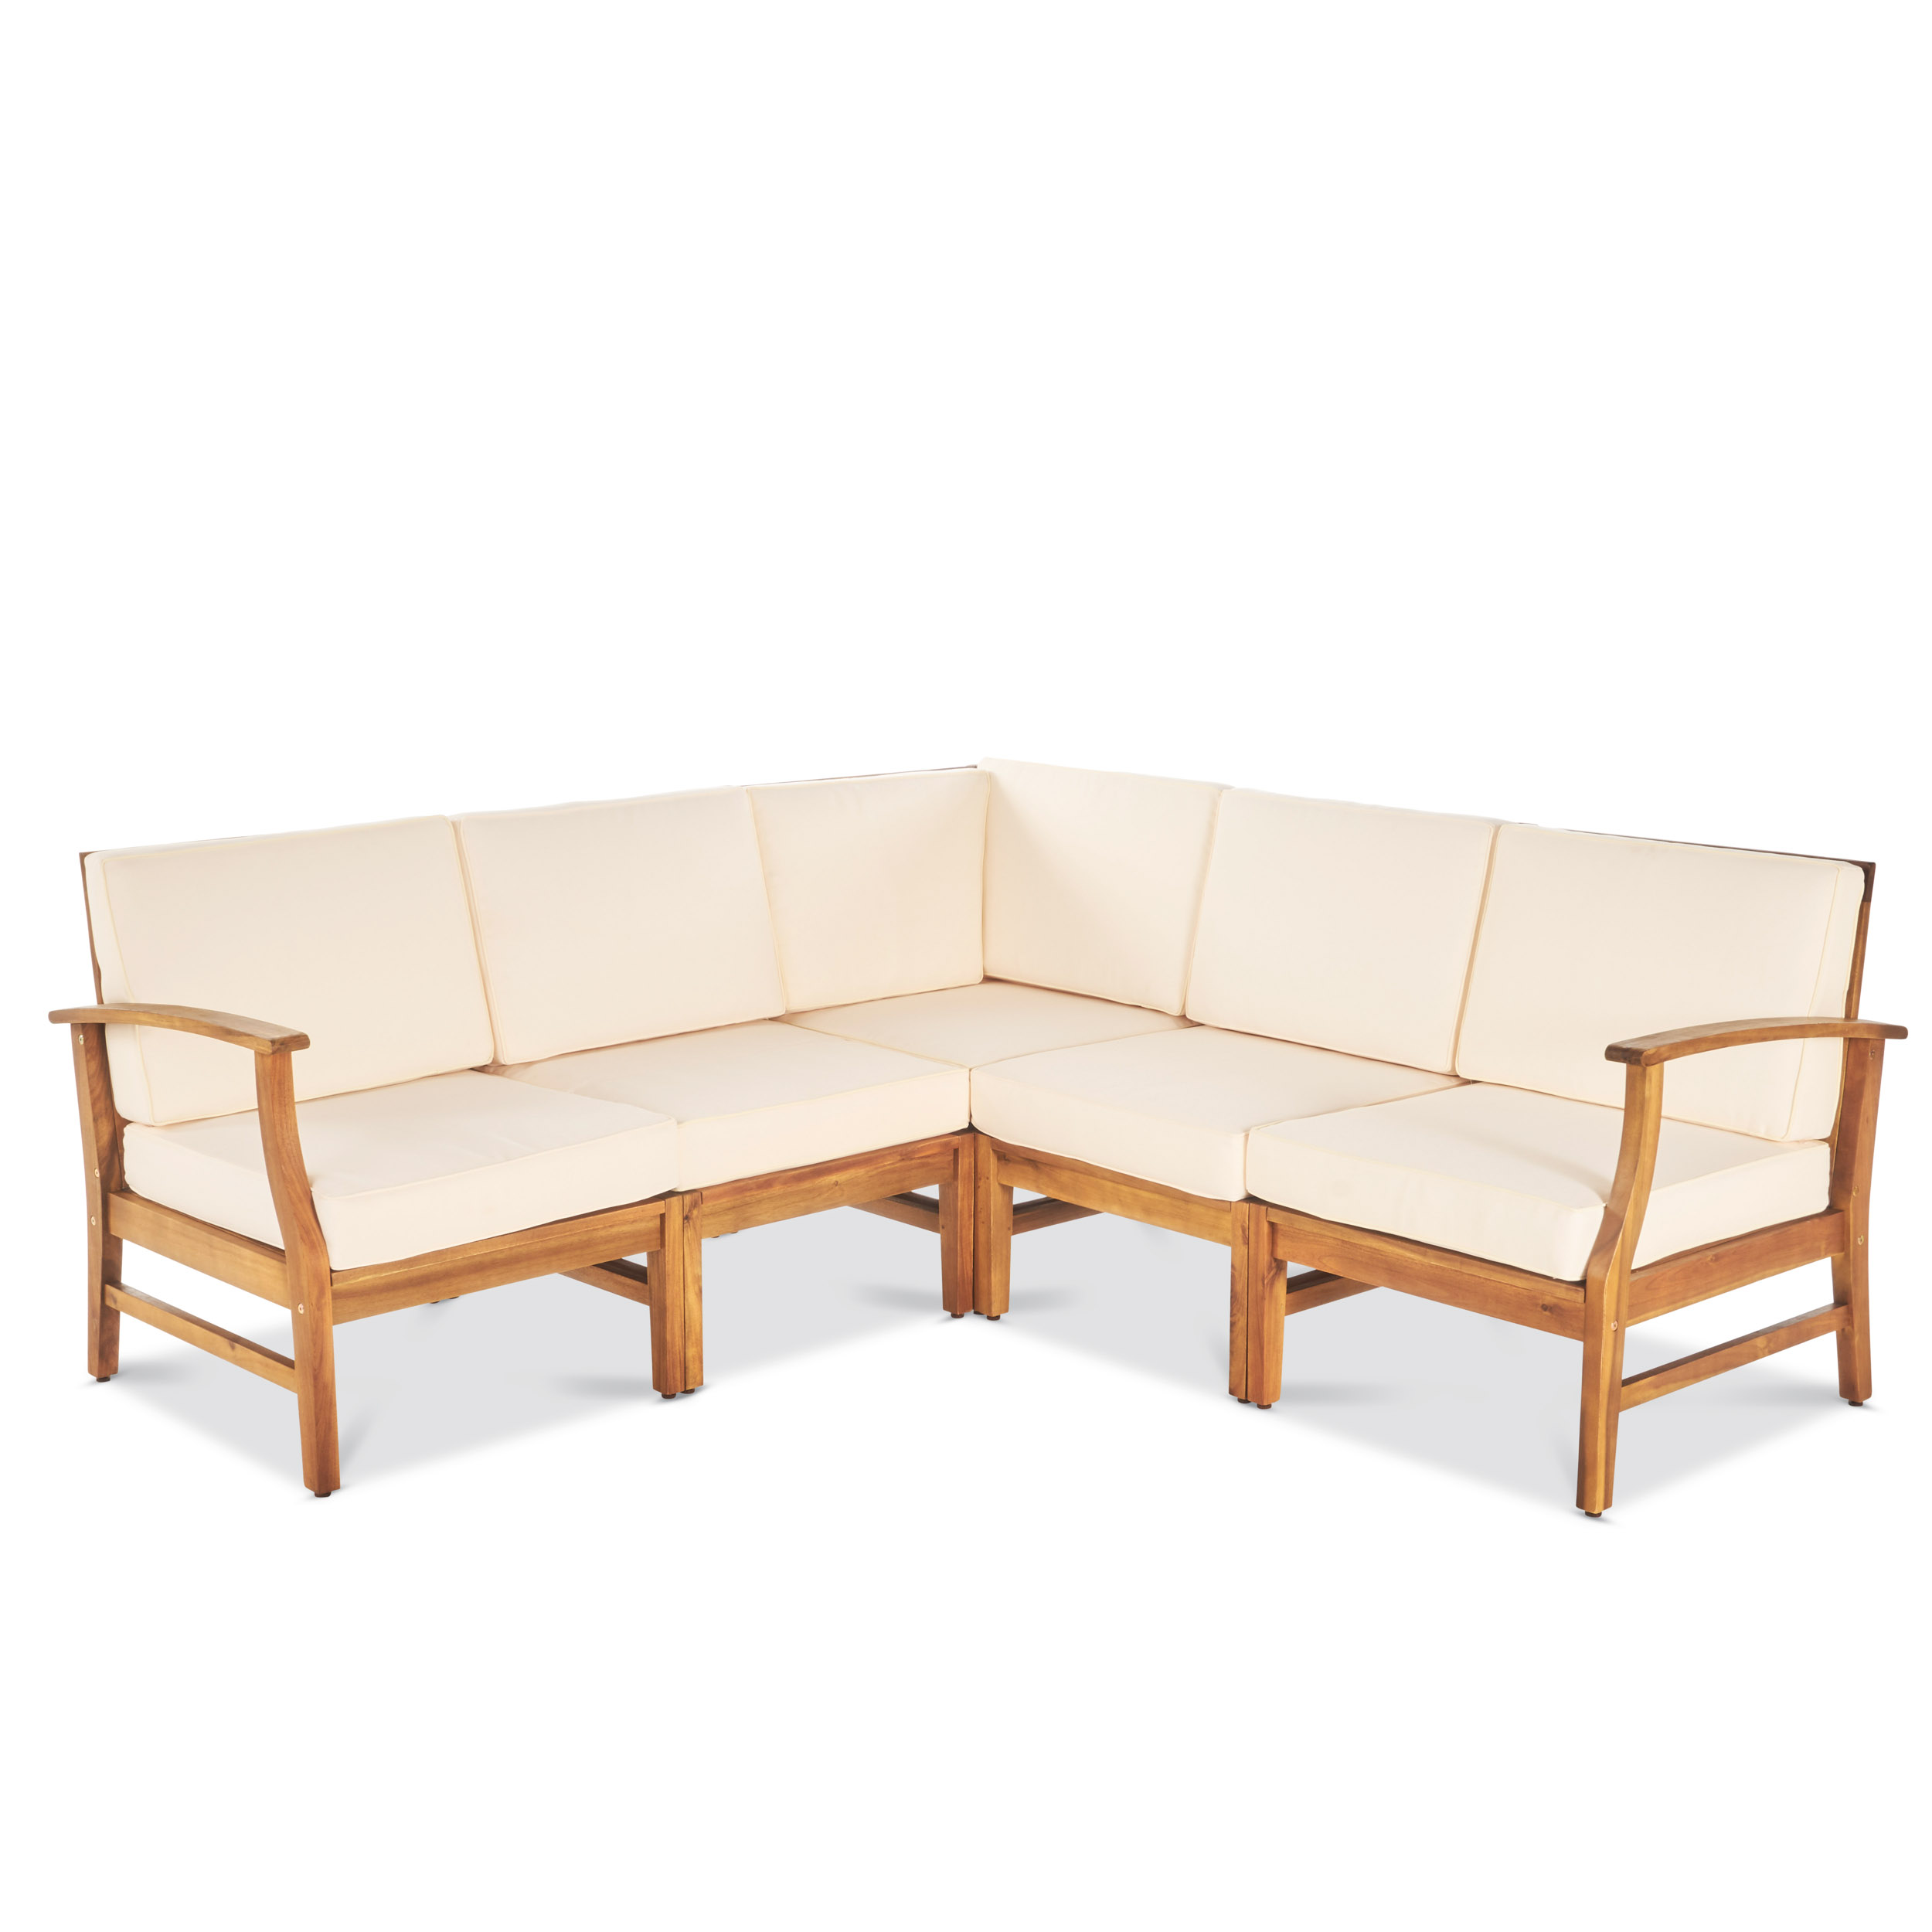 Hermosa Outdoor 5 Piece Chat Set with Cushions (No Coffee Table), Teak Finish, Cream - image 3 of 8